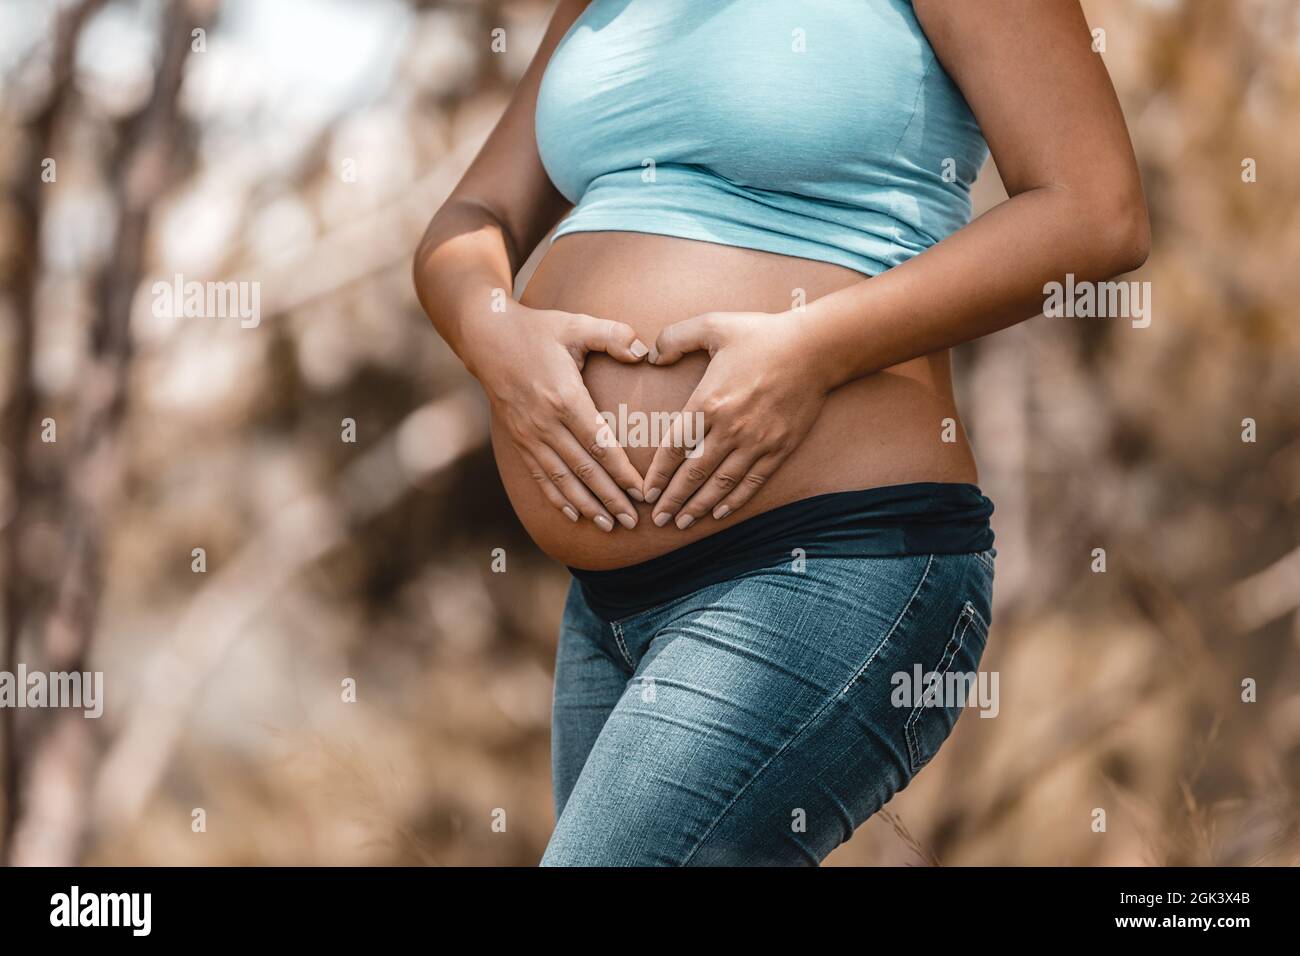 Tummy of a Pregnant Woman. Making Heart Shape by her Hands on Belly. Body Part. Enjoying Pregnancy. Young Happy Family. Stock Photo